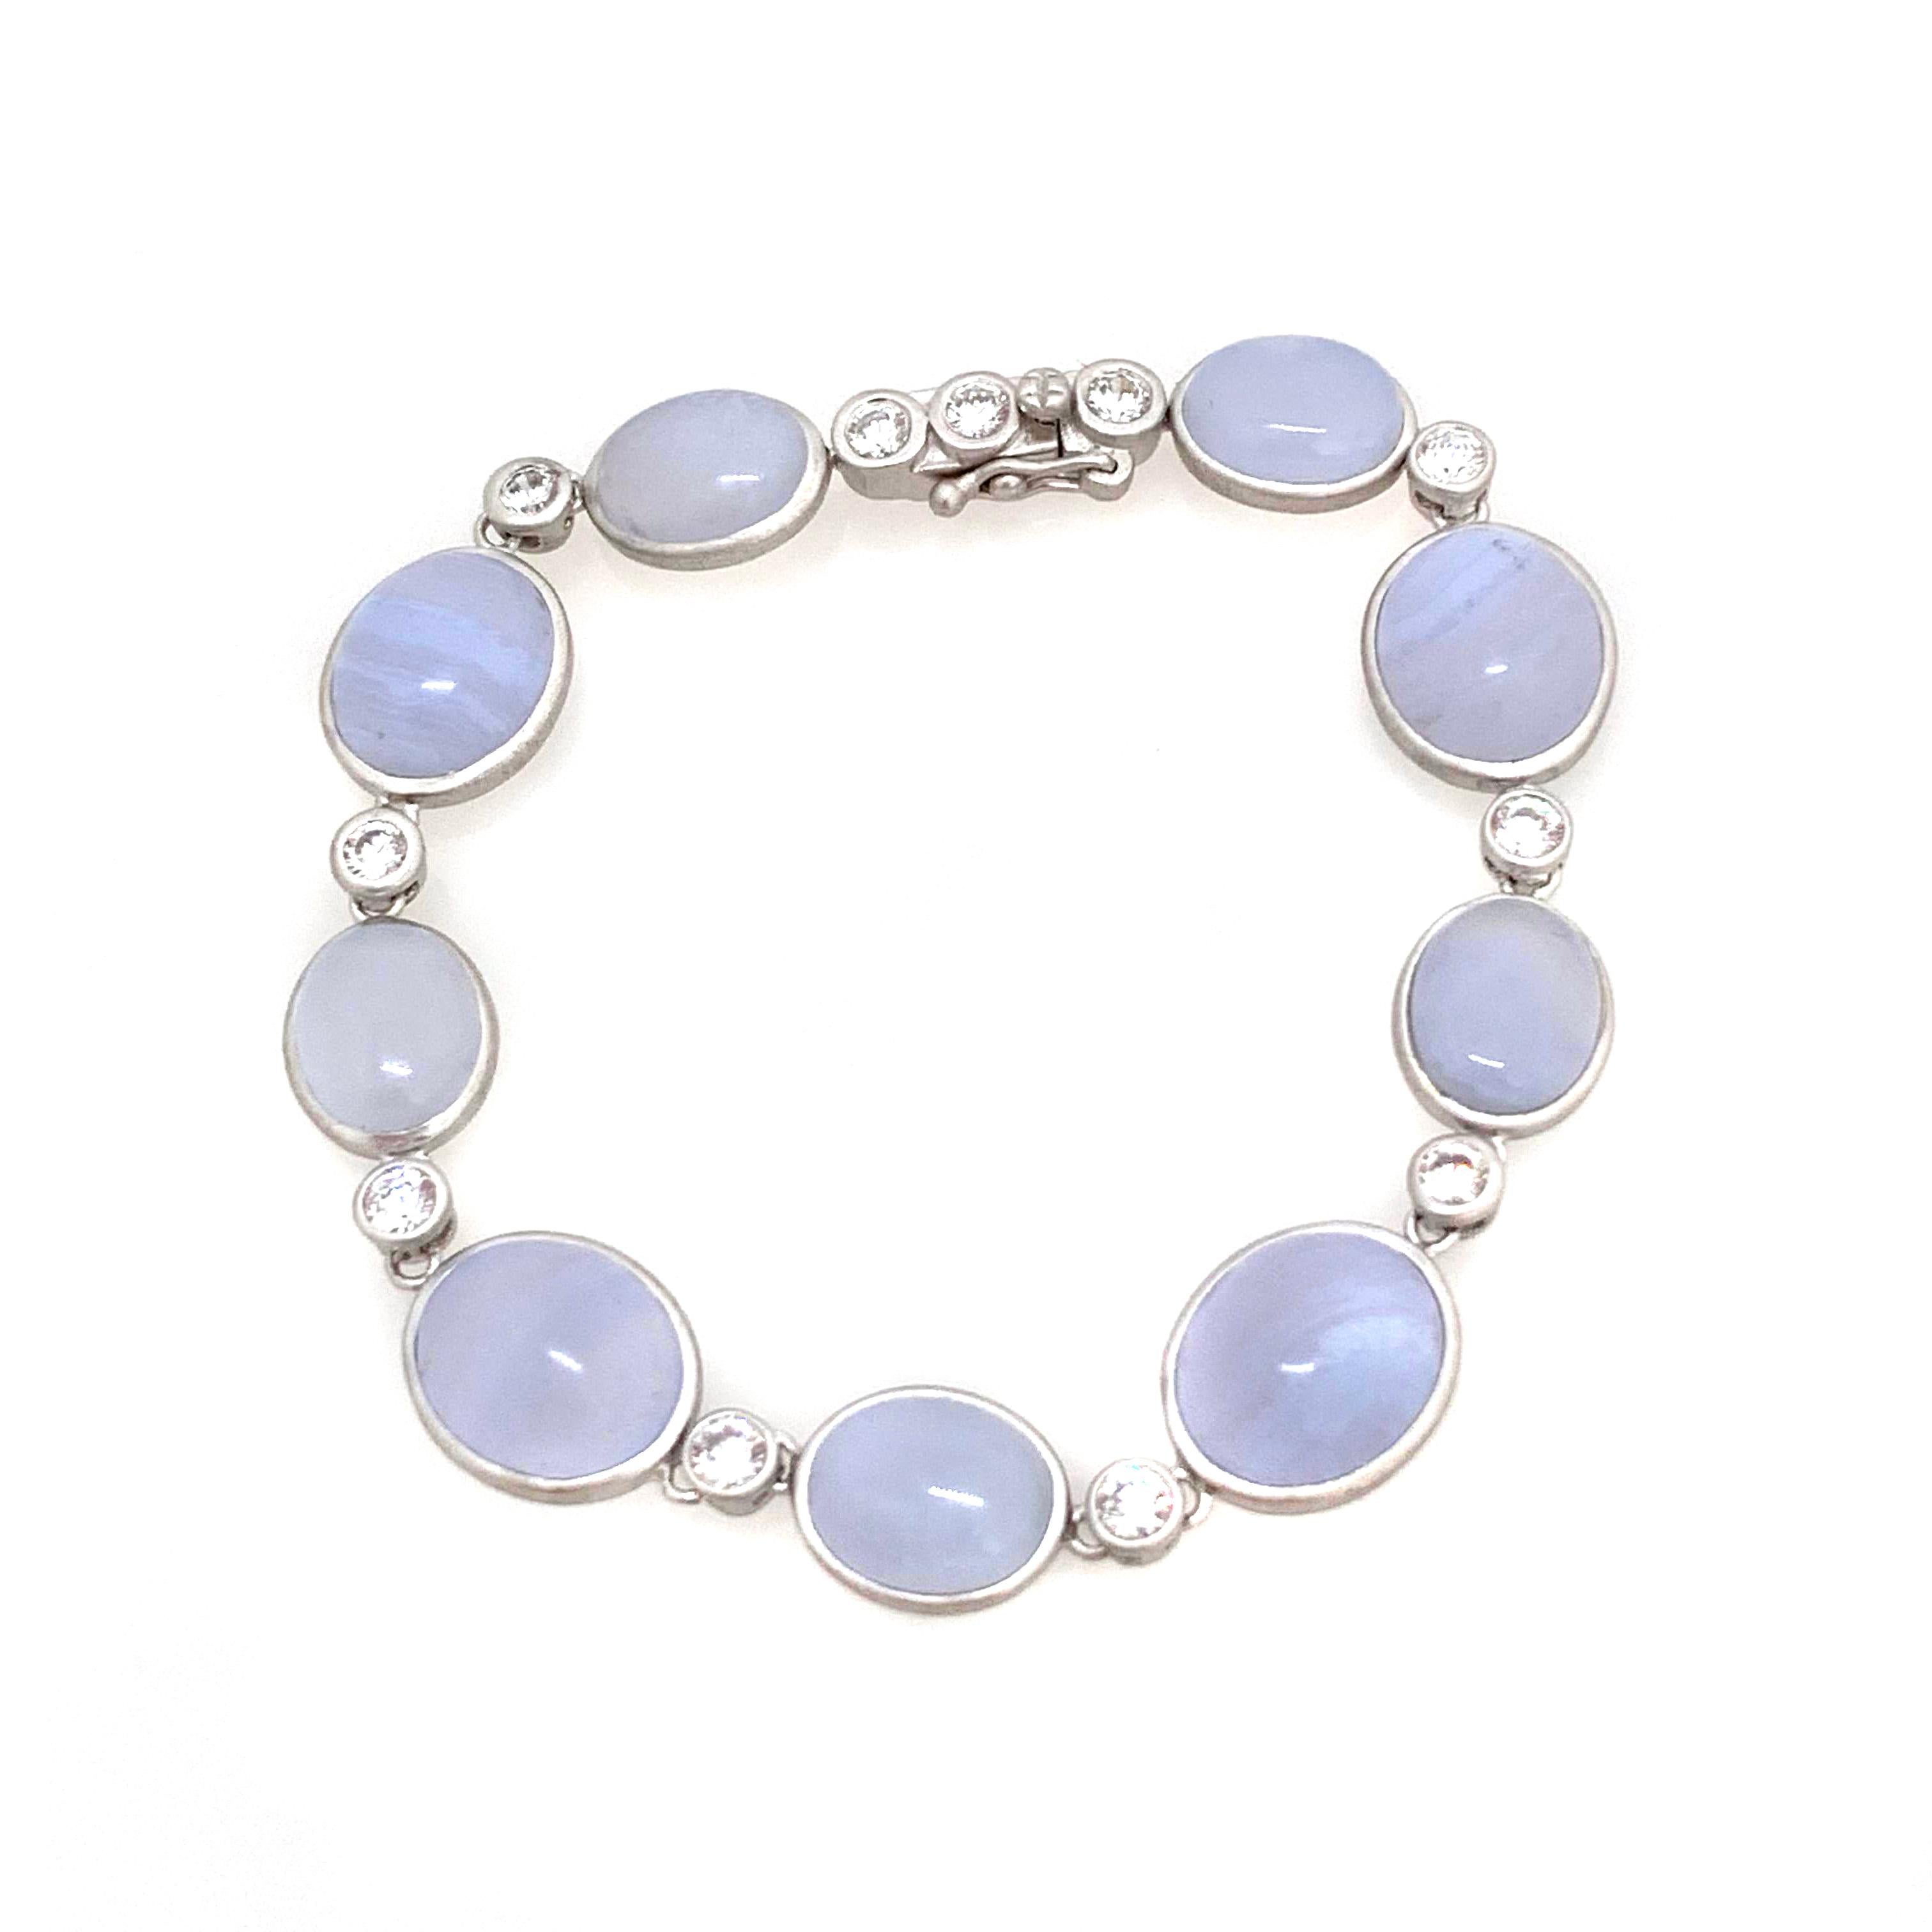 Discover Bijoux Num bezel-set oval chalcedony station bracelet.

This beautiful bracelet features 9 pieces of beautiful periwinkle purple-ish blue cabochon-cut oval chalcedony, handcrafted brushed satin texturing technique, and hand set in platinum